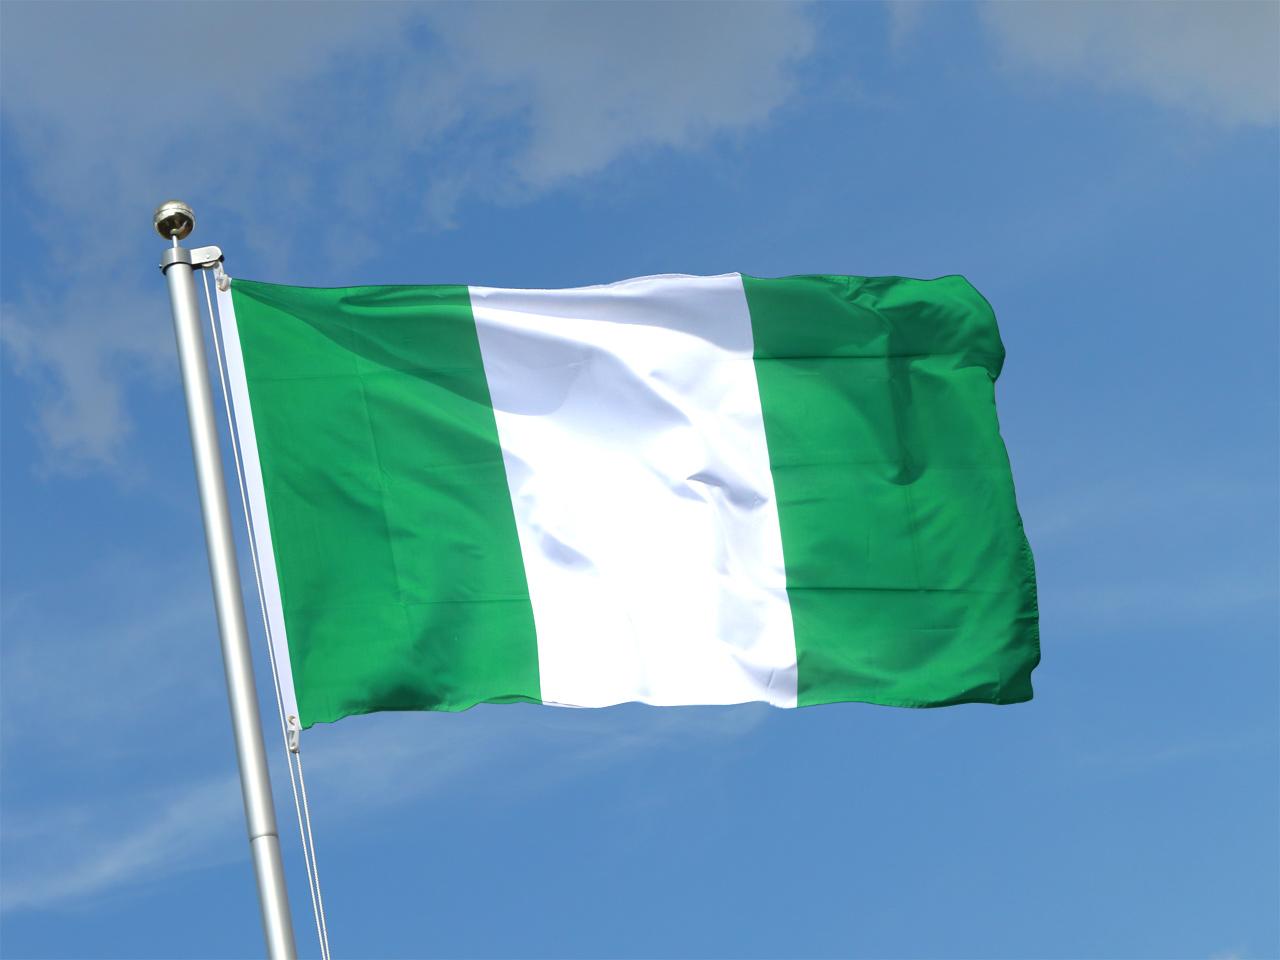 Uncle Lai, 'Bring Back Our Flag!'. The Guardian Nigeria News